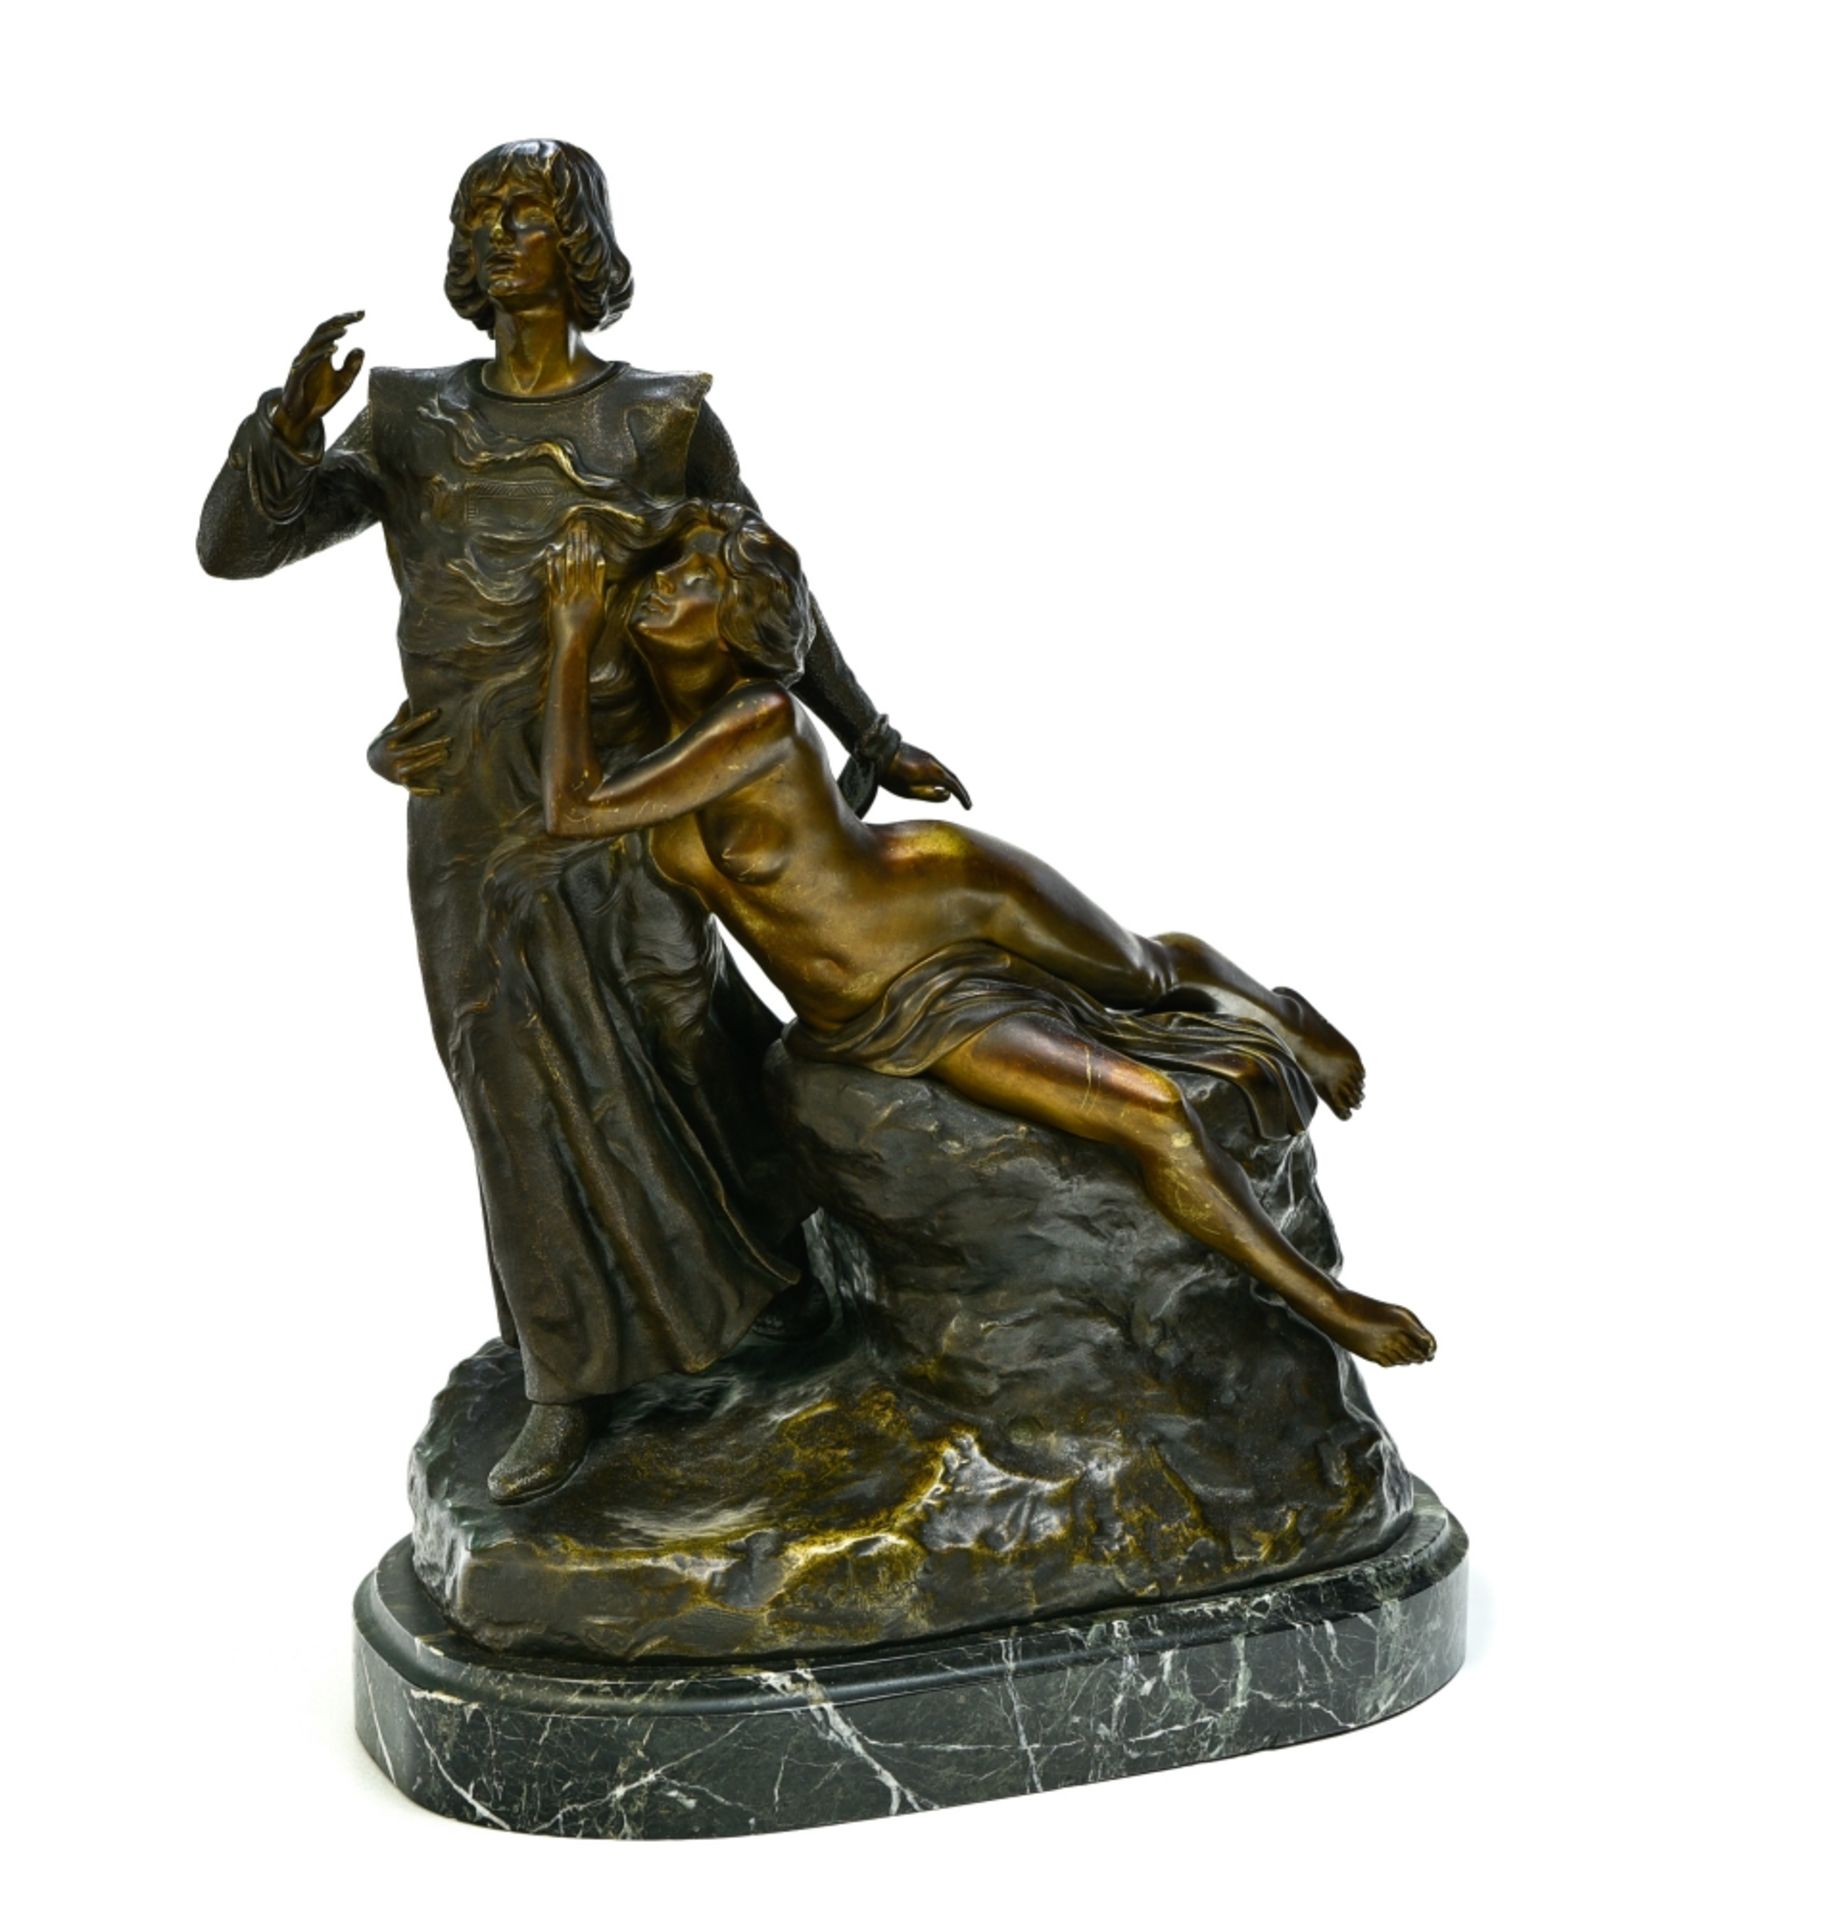 Louis CHALON (1866-1940) TannhŠuser bronze sculpture with shaded brown patina, sea green marble